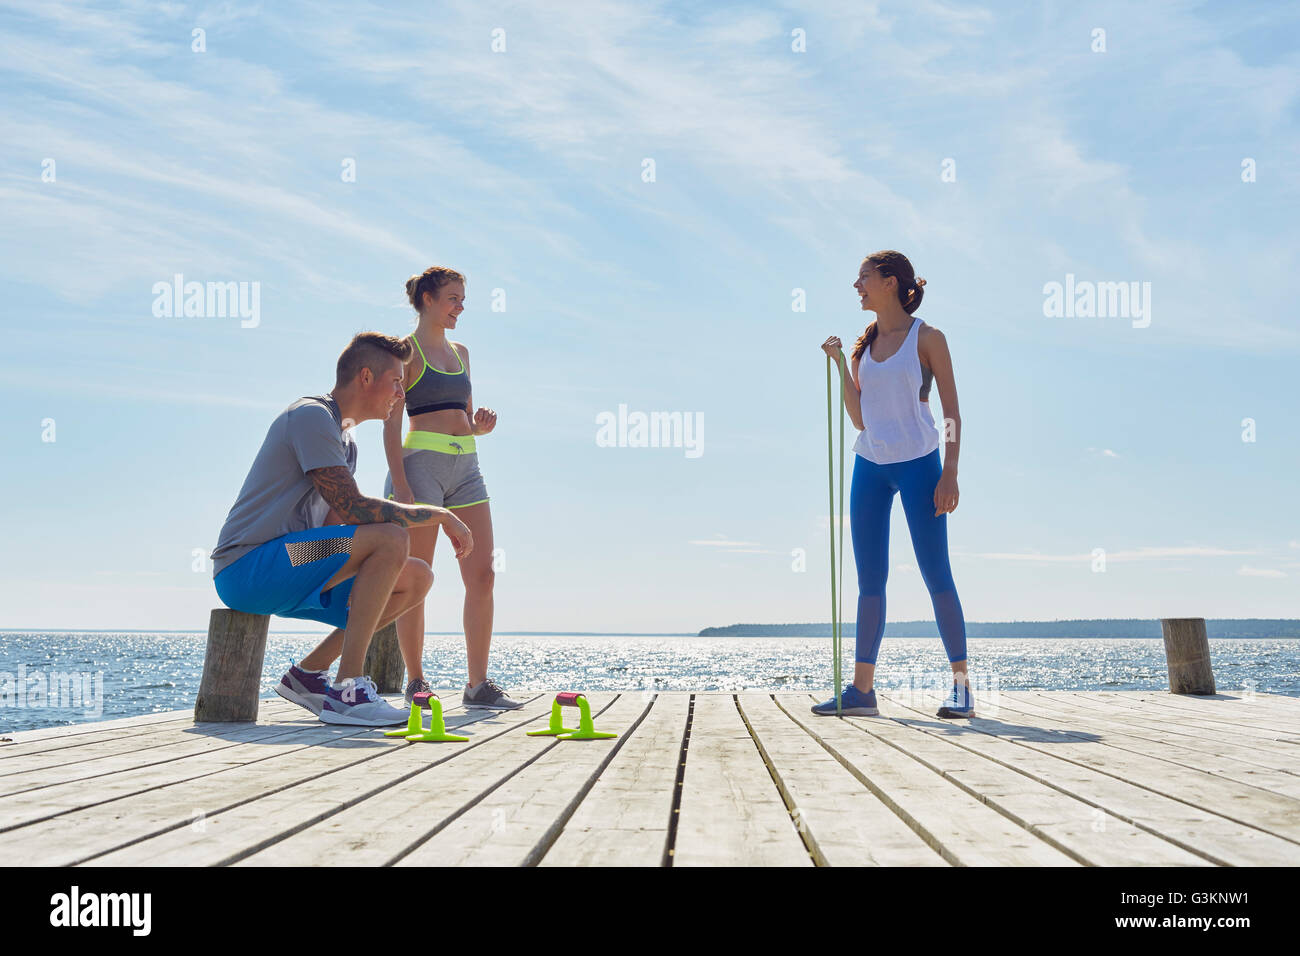 Friends wearing sports clothes on pier with exercise equipment Stock Photo